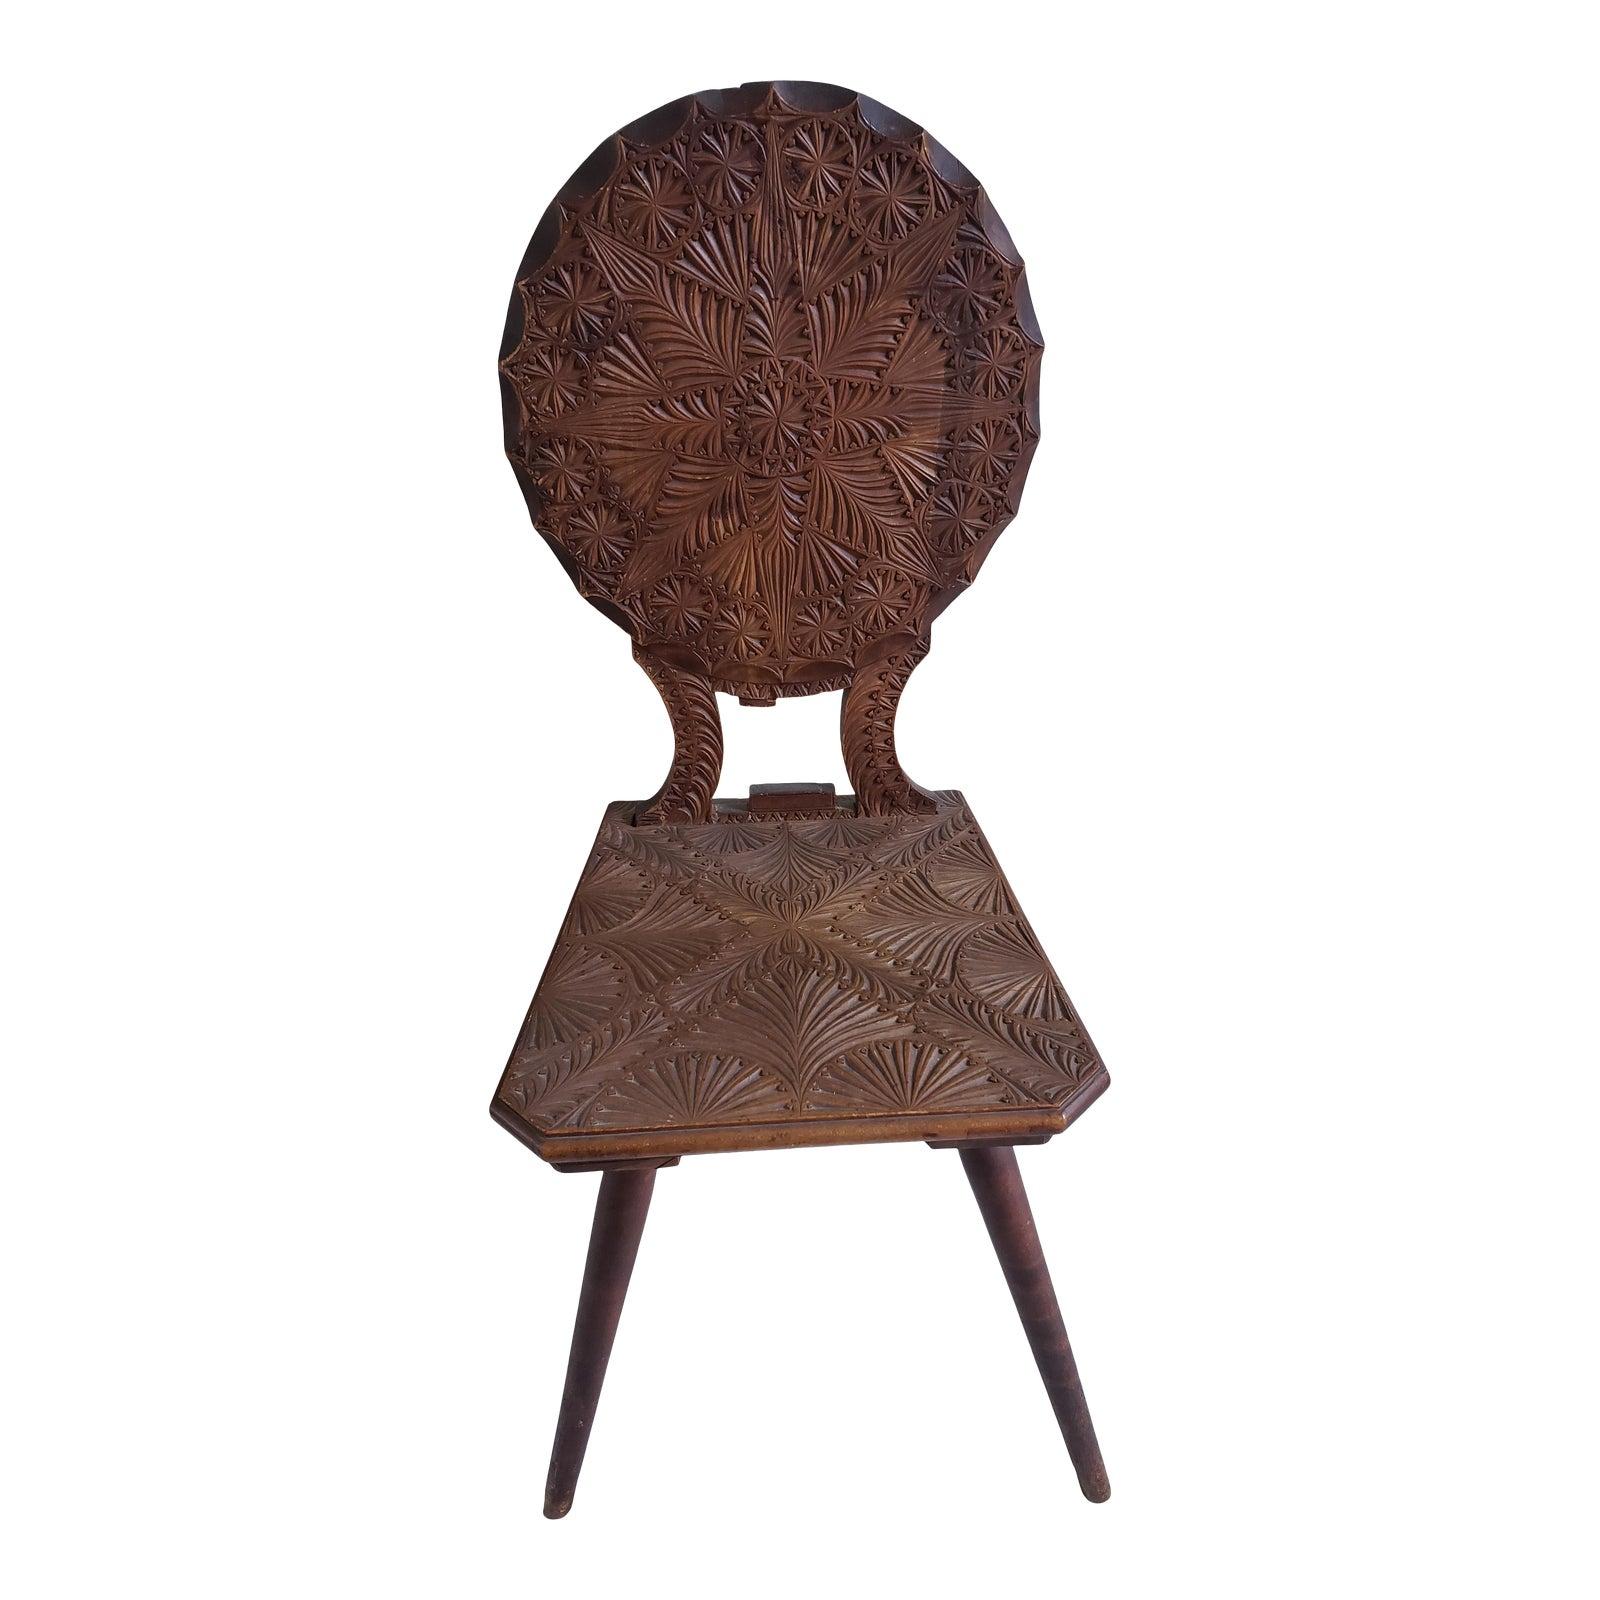 Early 20th Century Antique Carved Wood Chair For Sale